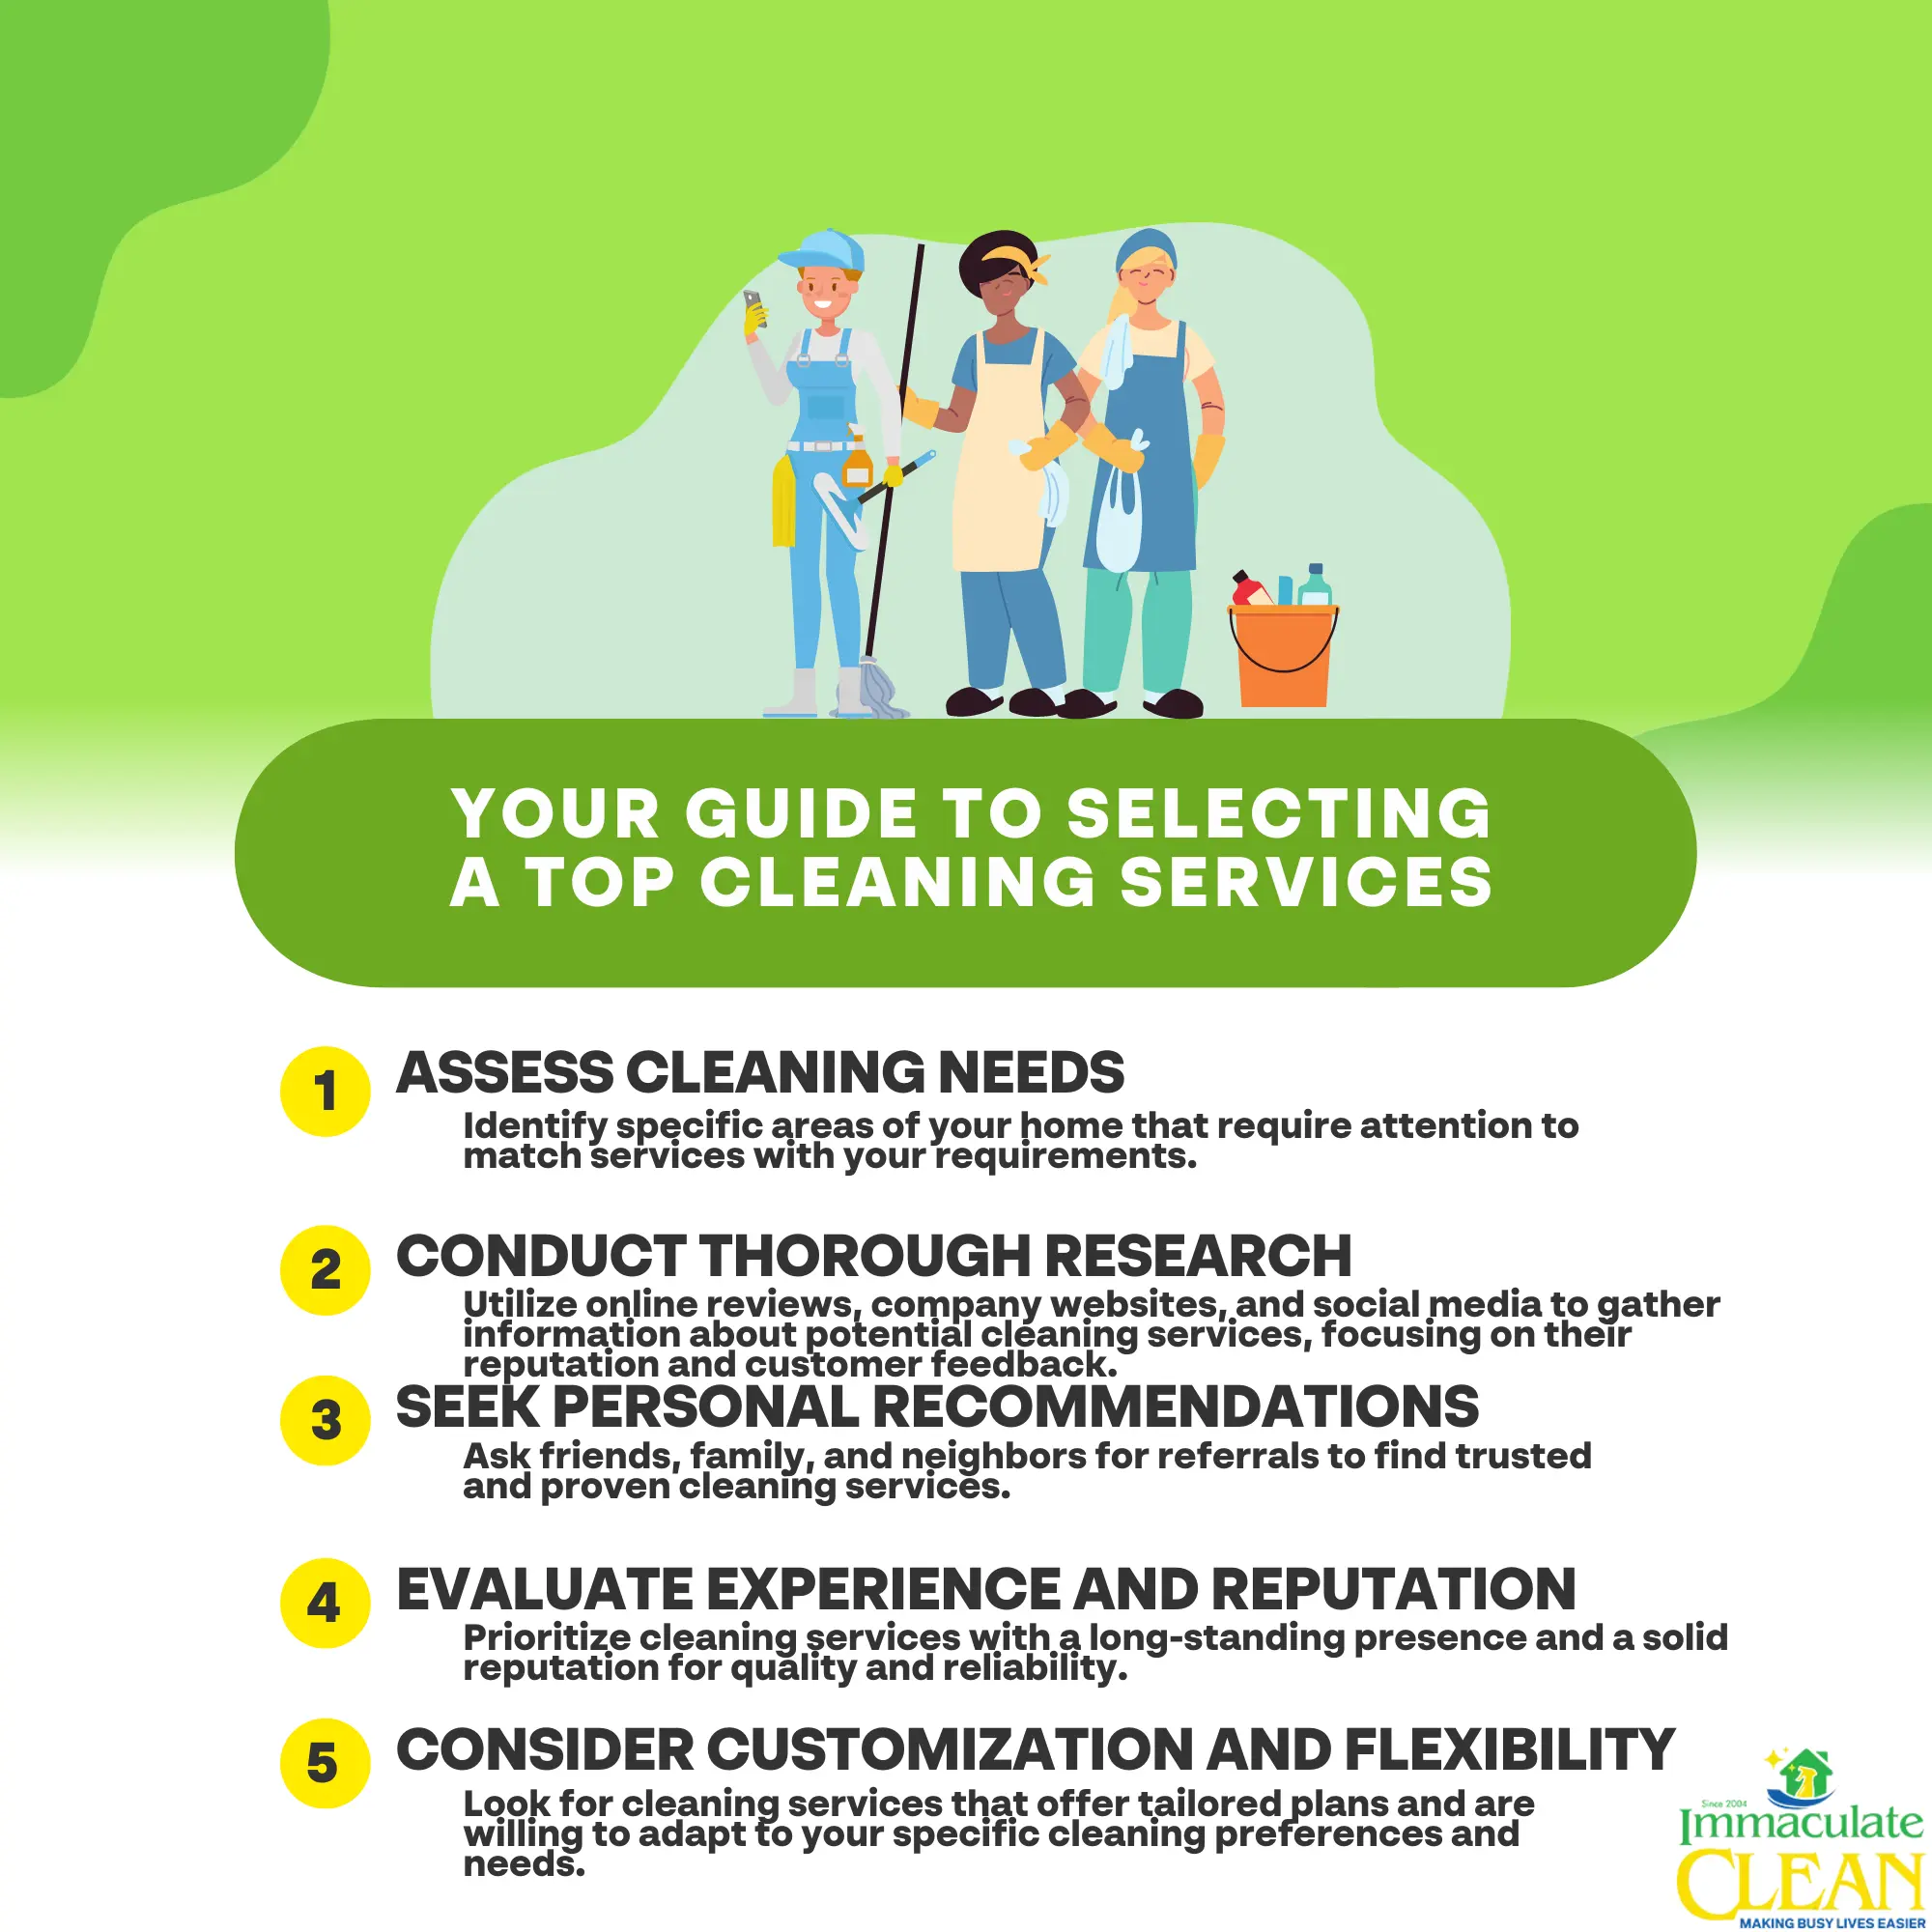 Your Guide to Selecting a Top Cleaning Services